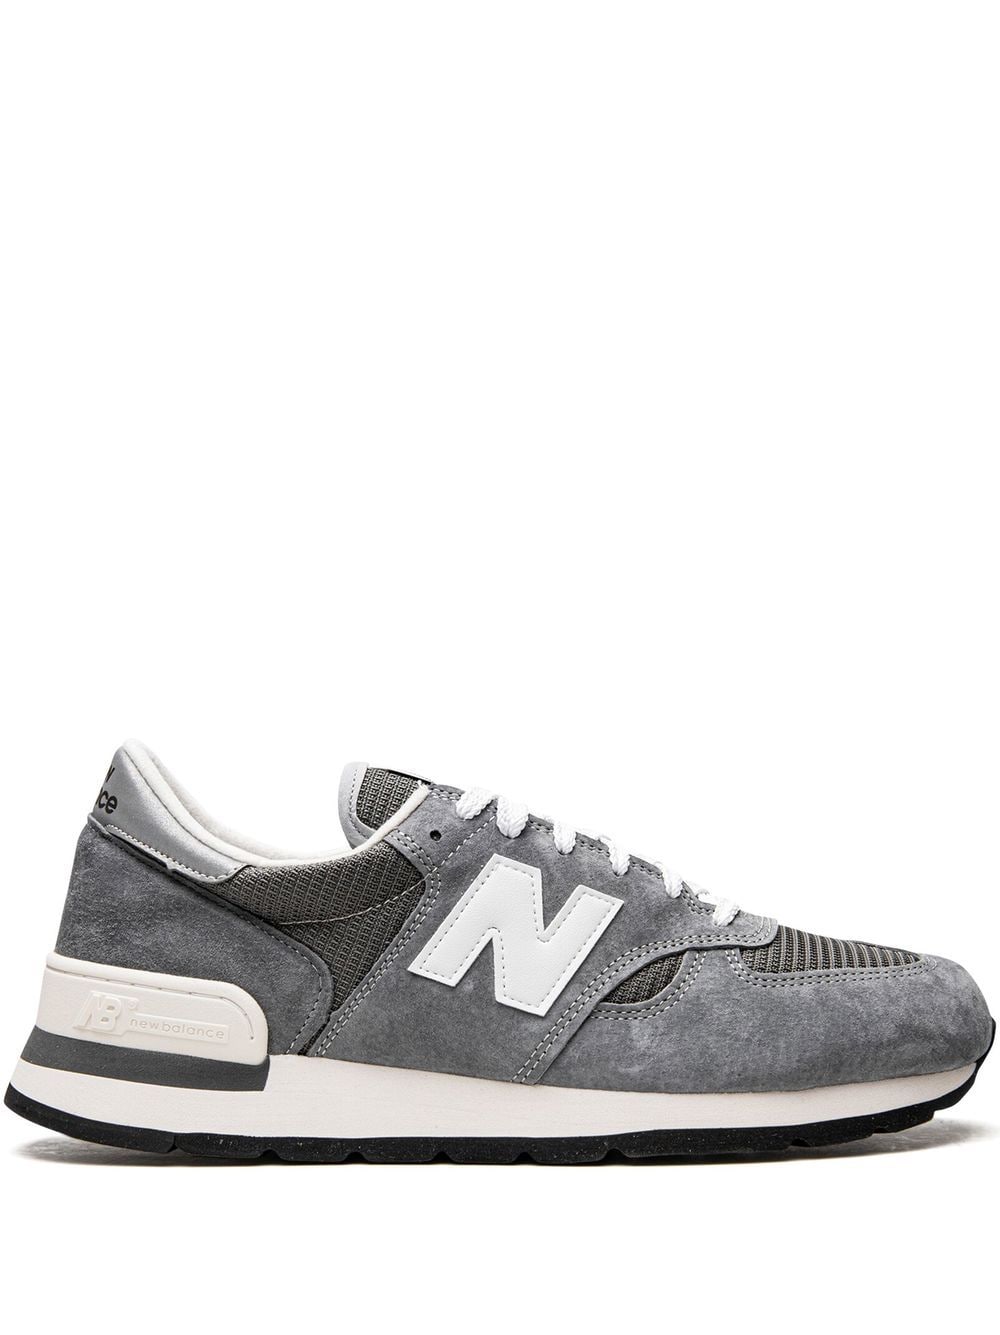 New Balance 990 Made in USA"Grey" sneakers von New Balance